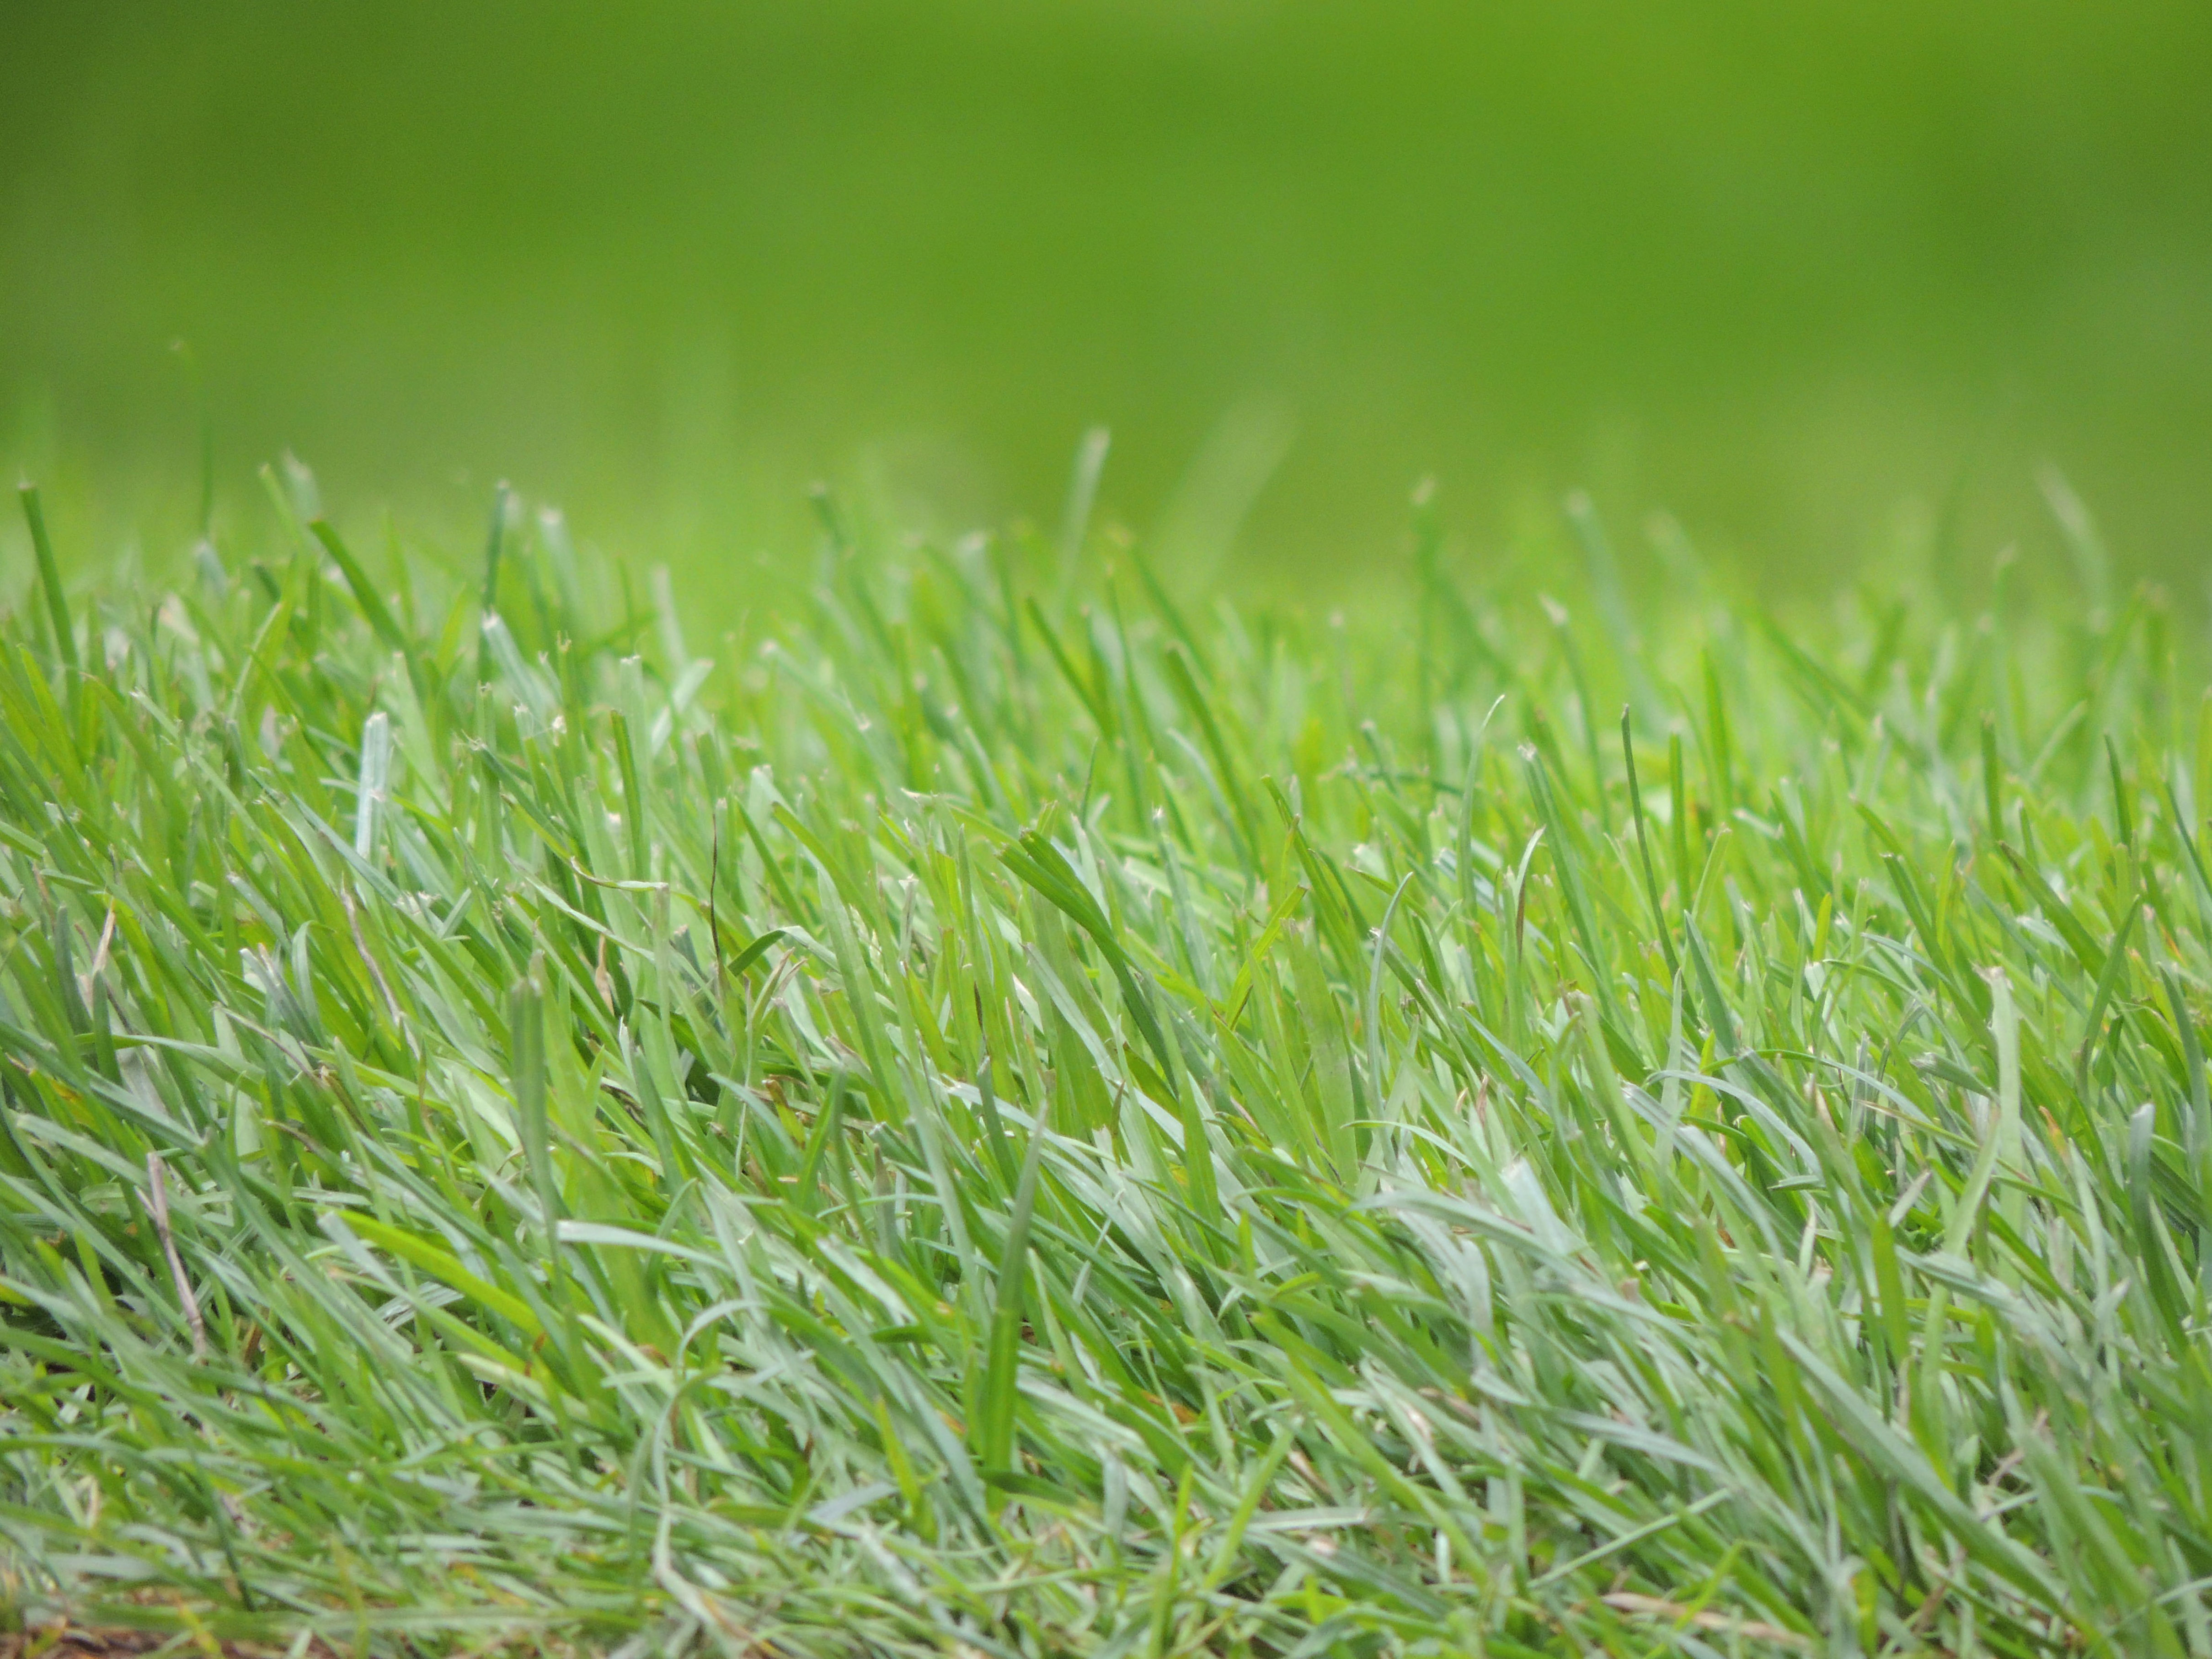 Seven Free Grass Textures Or Lawn Background Images 